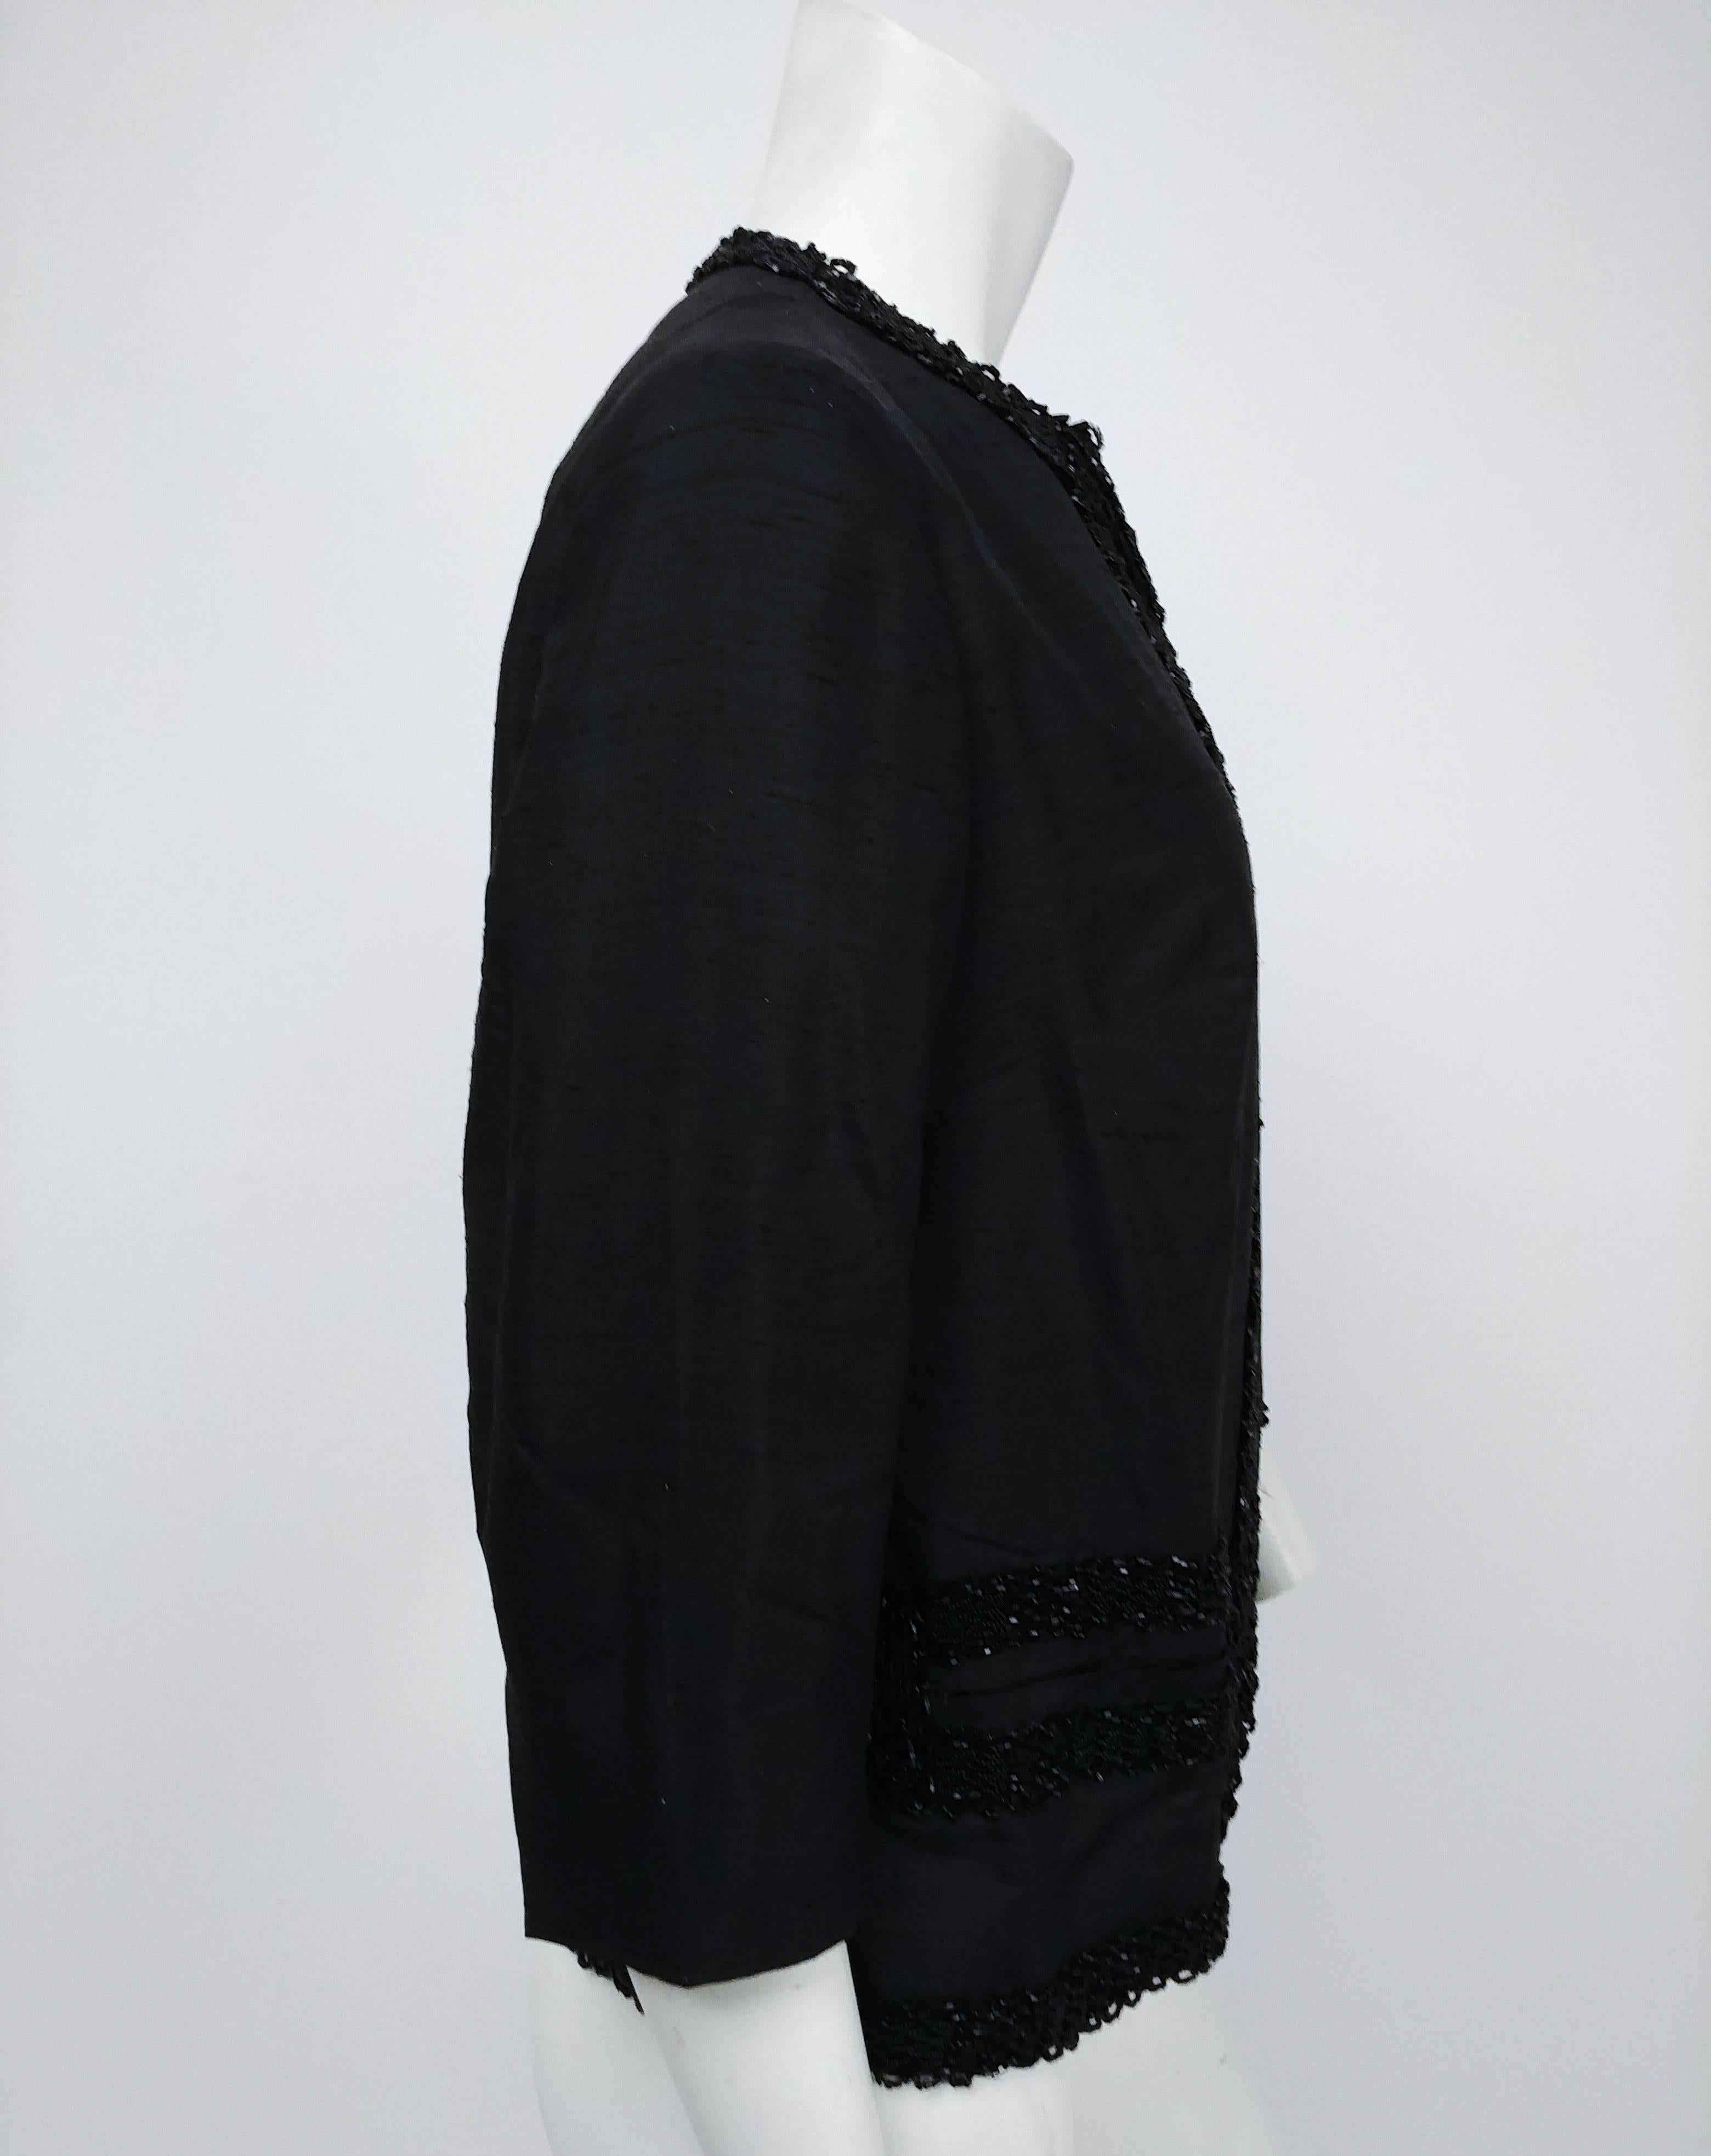 1960s Shantung Black Beaded Evening Jacket. Collarless 1960s jacket with beaded trim, glove length sleeves, and classic boxy silhouette. Two front welt pockets. 